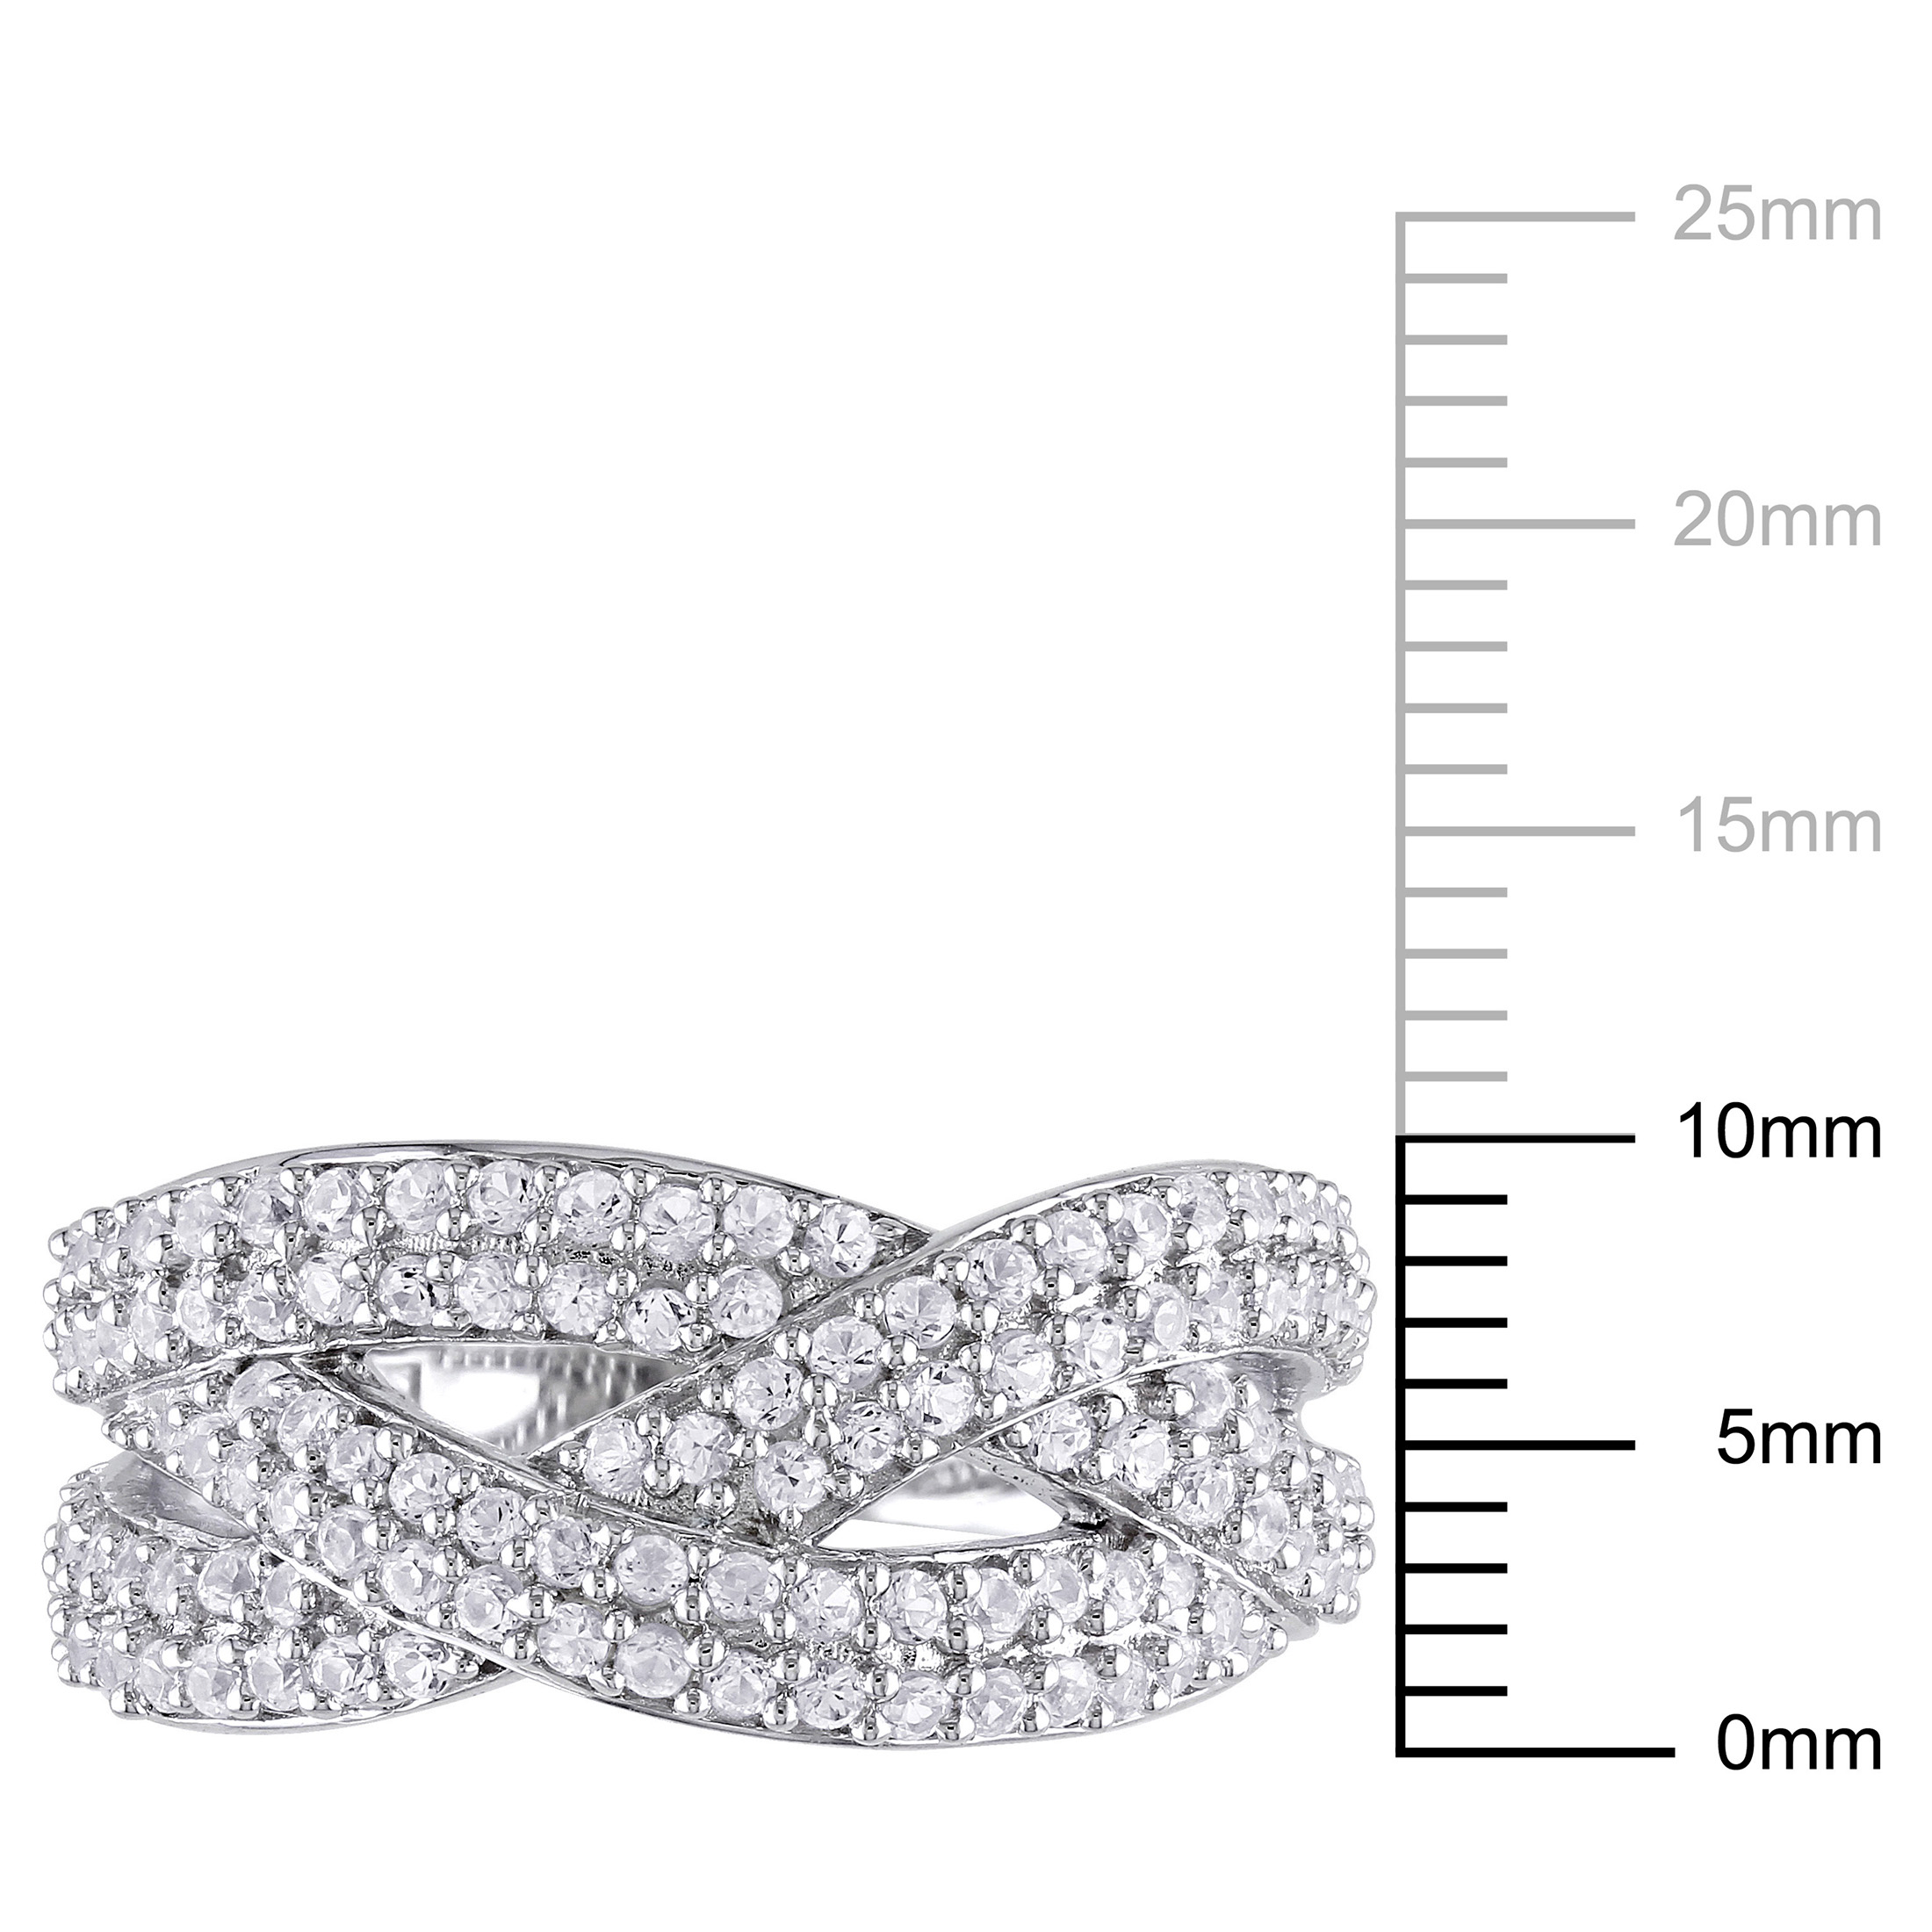 Everly Women's 1 1/4 CT T.G.W. Round-Cut Created White Sapphire Sterling Silver Multi-Row Criss Cross Ring with Prong Setting - image 3 of 7